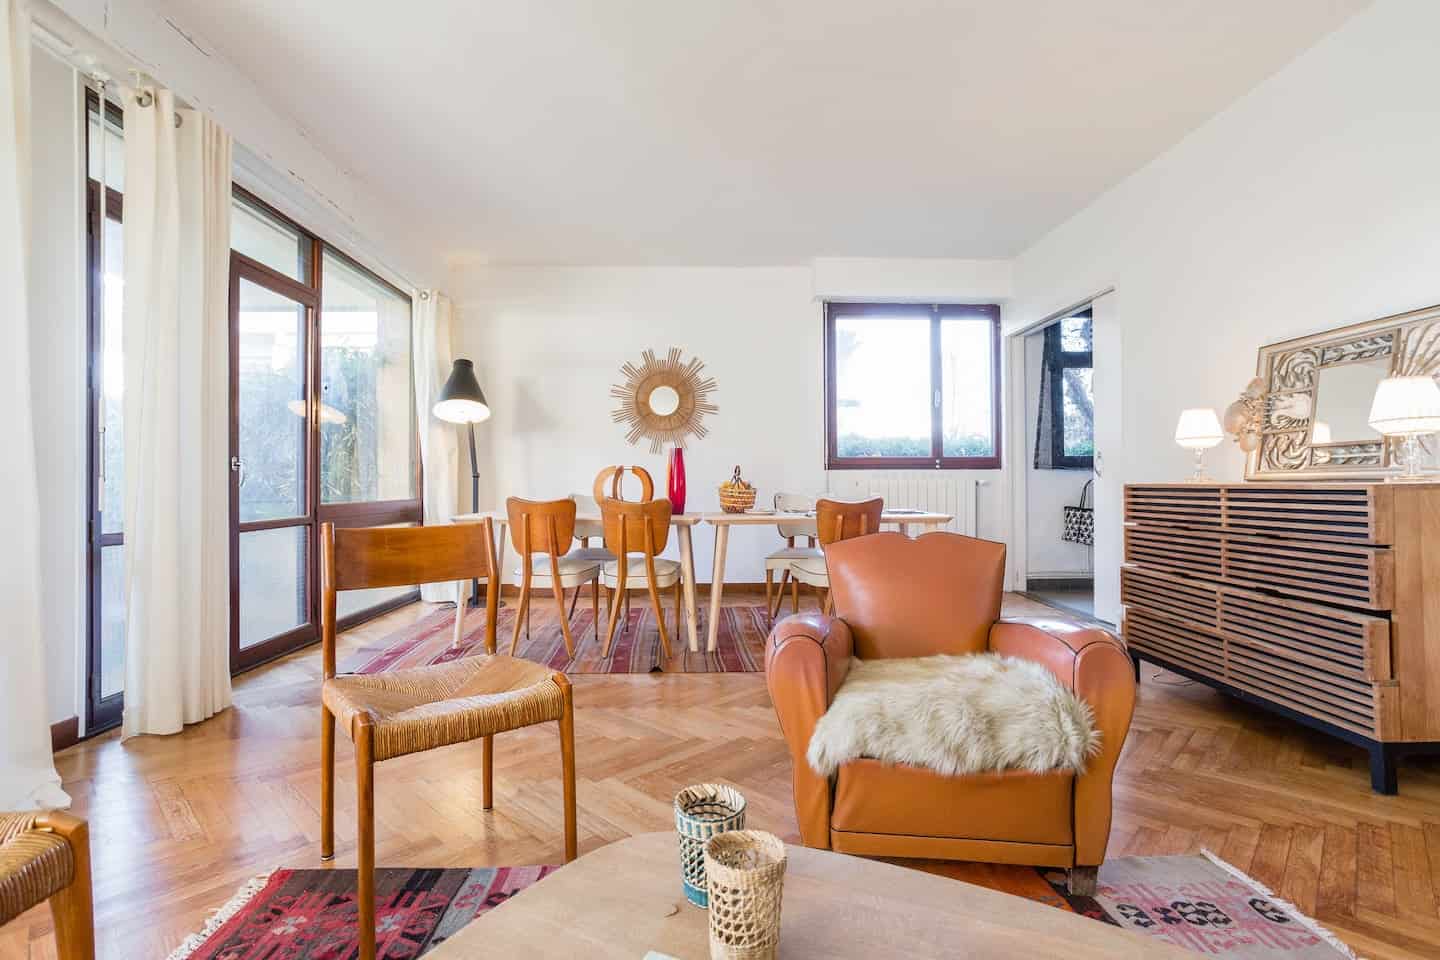 Image of Airbnb rental in Aix-en-Provence, France